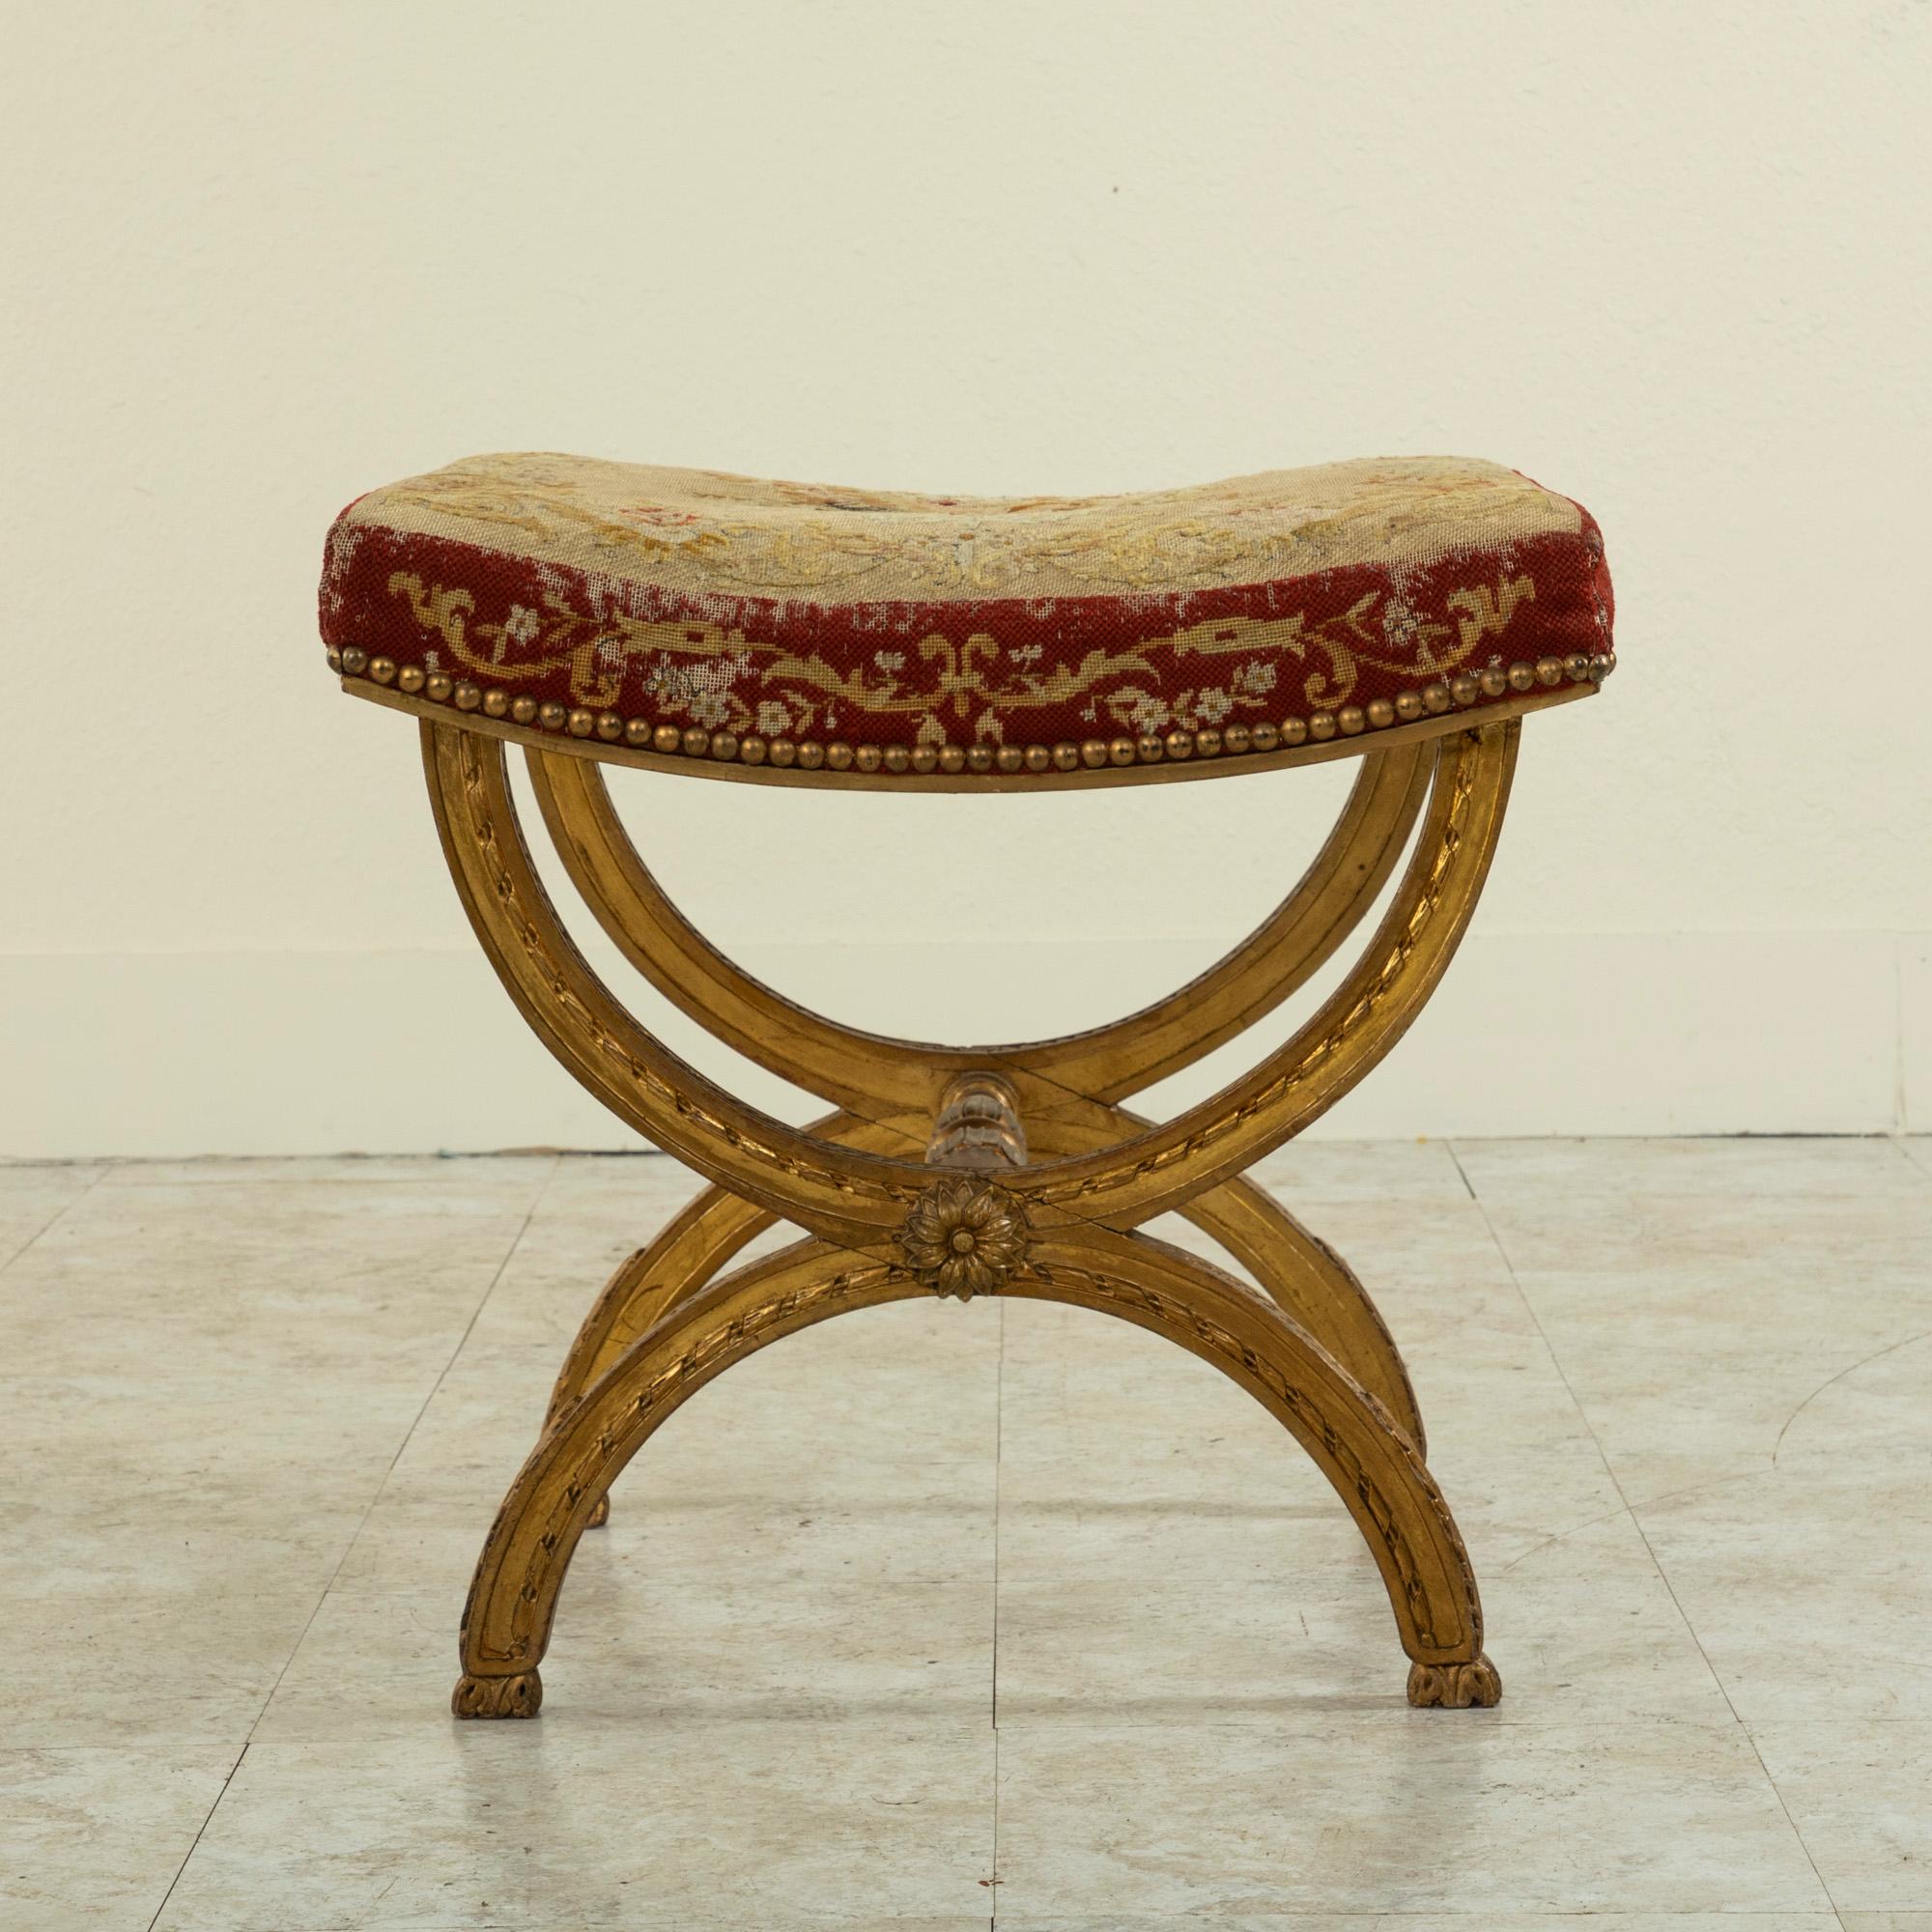 19th Century French Louis XIV Giltwood Bench, Vanity Stool with Needlepoint Seat 1